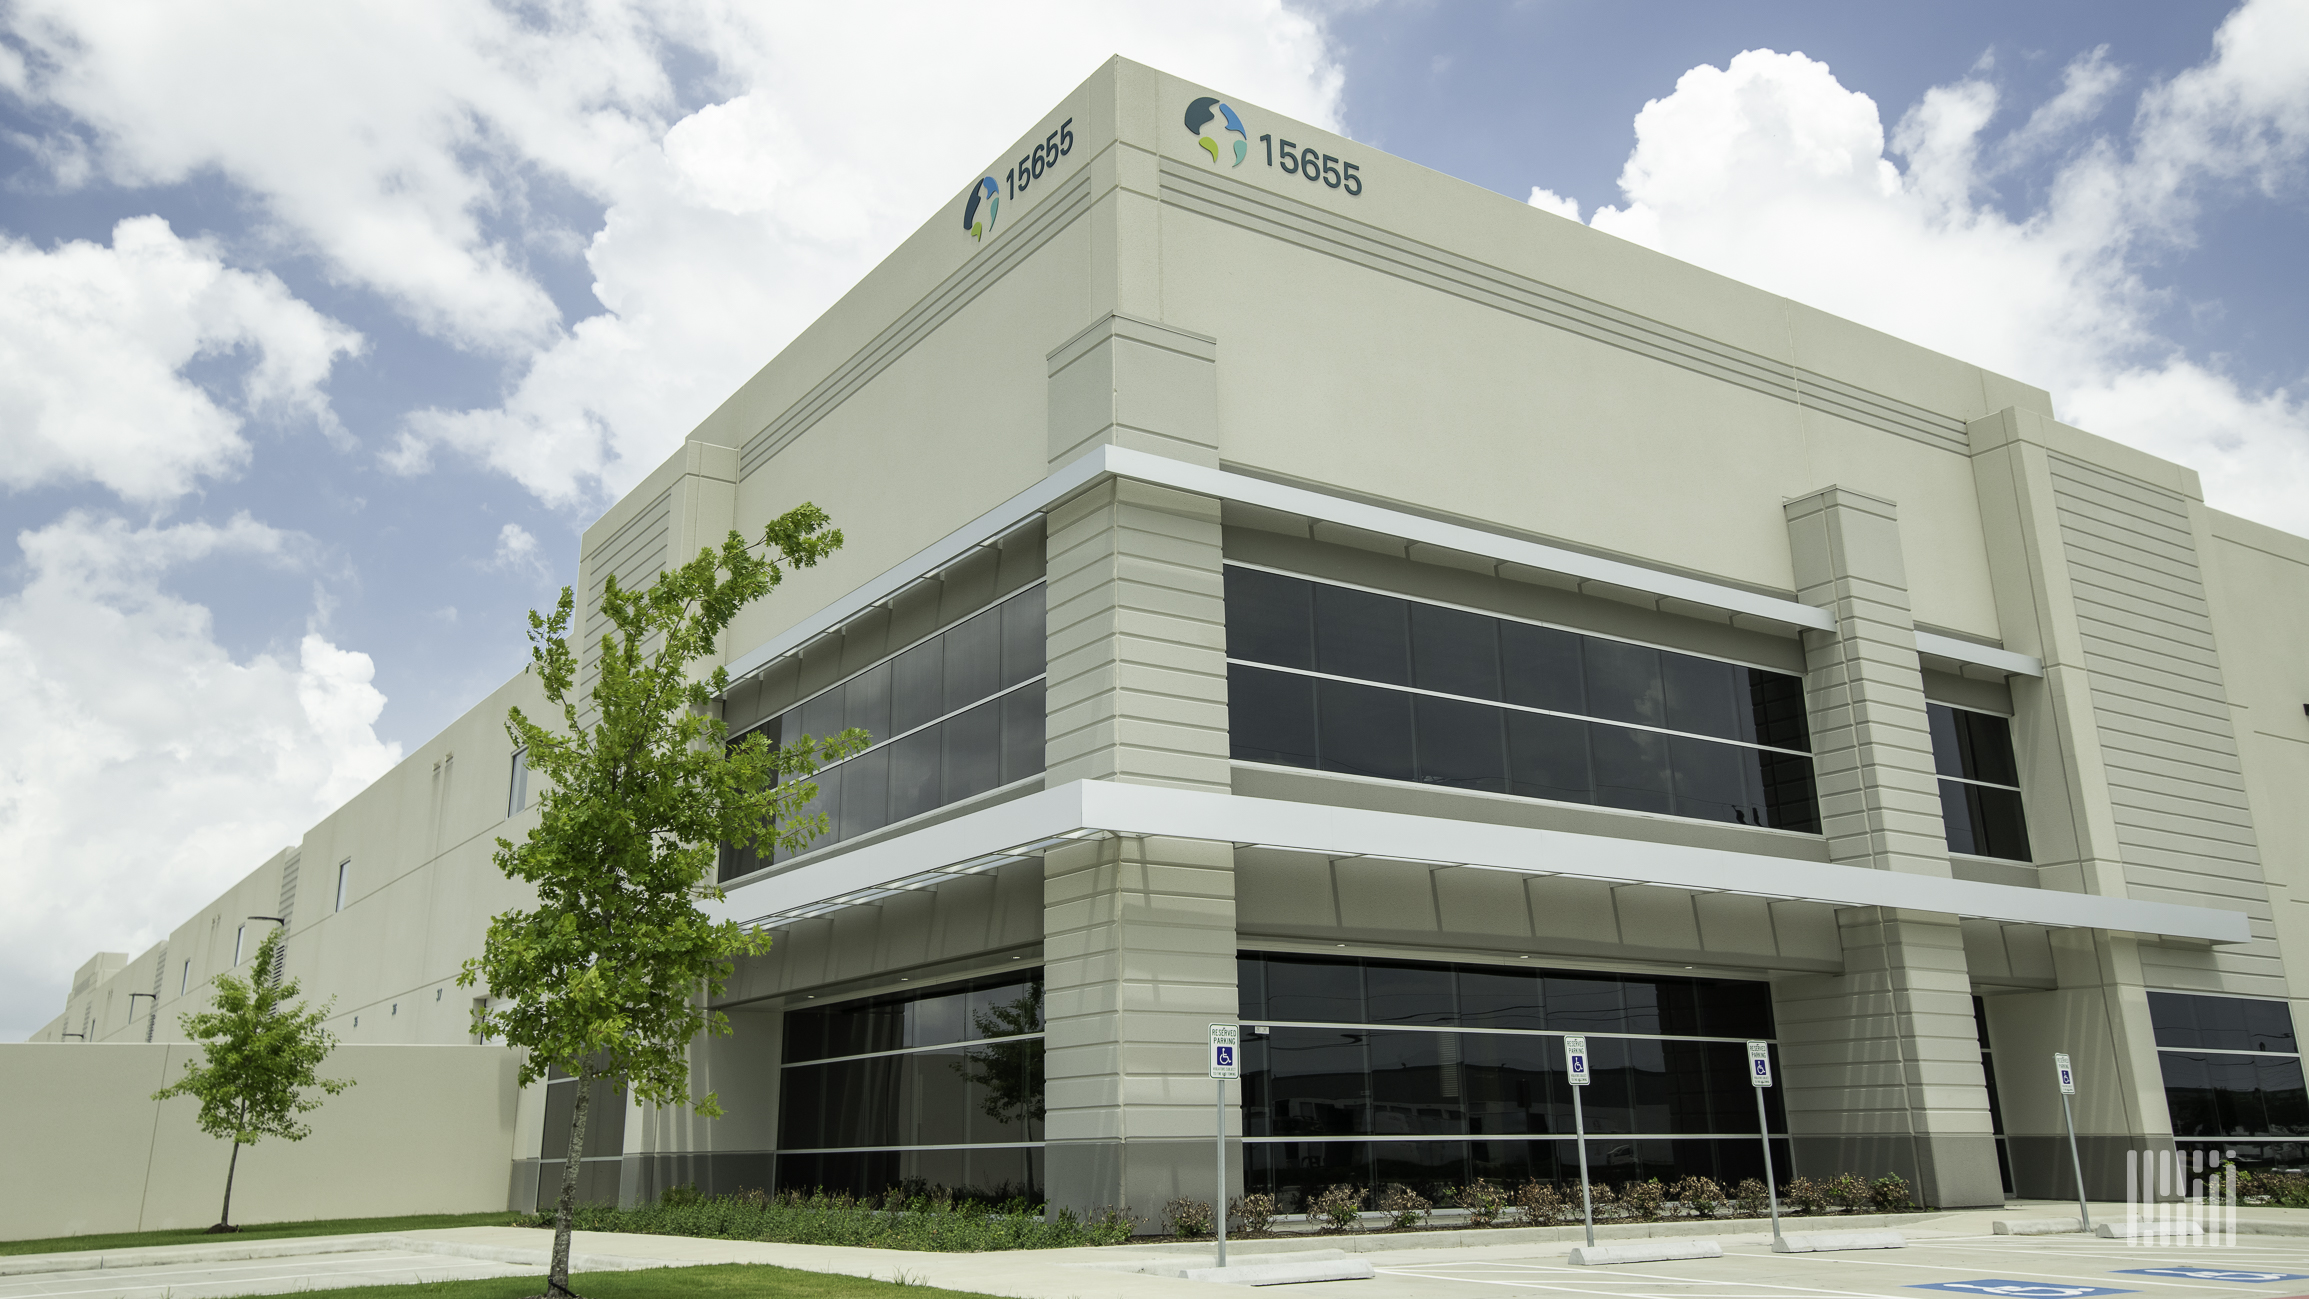 A Prologis facility in Houston